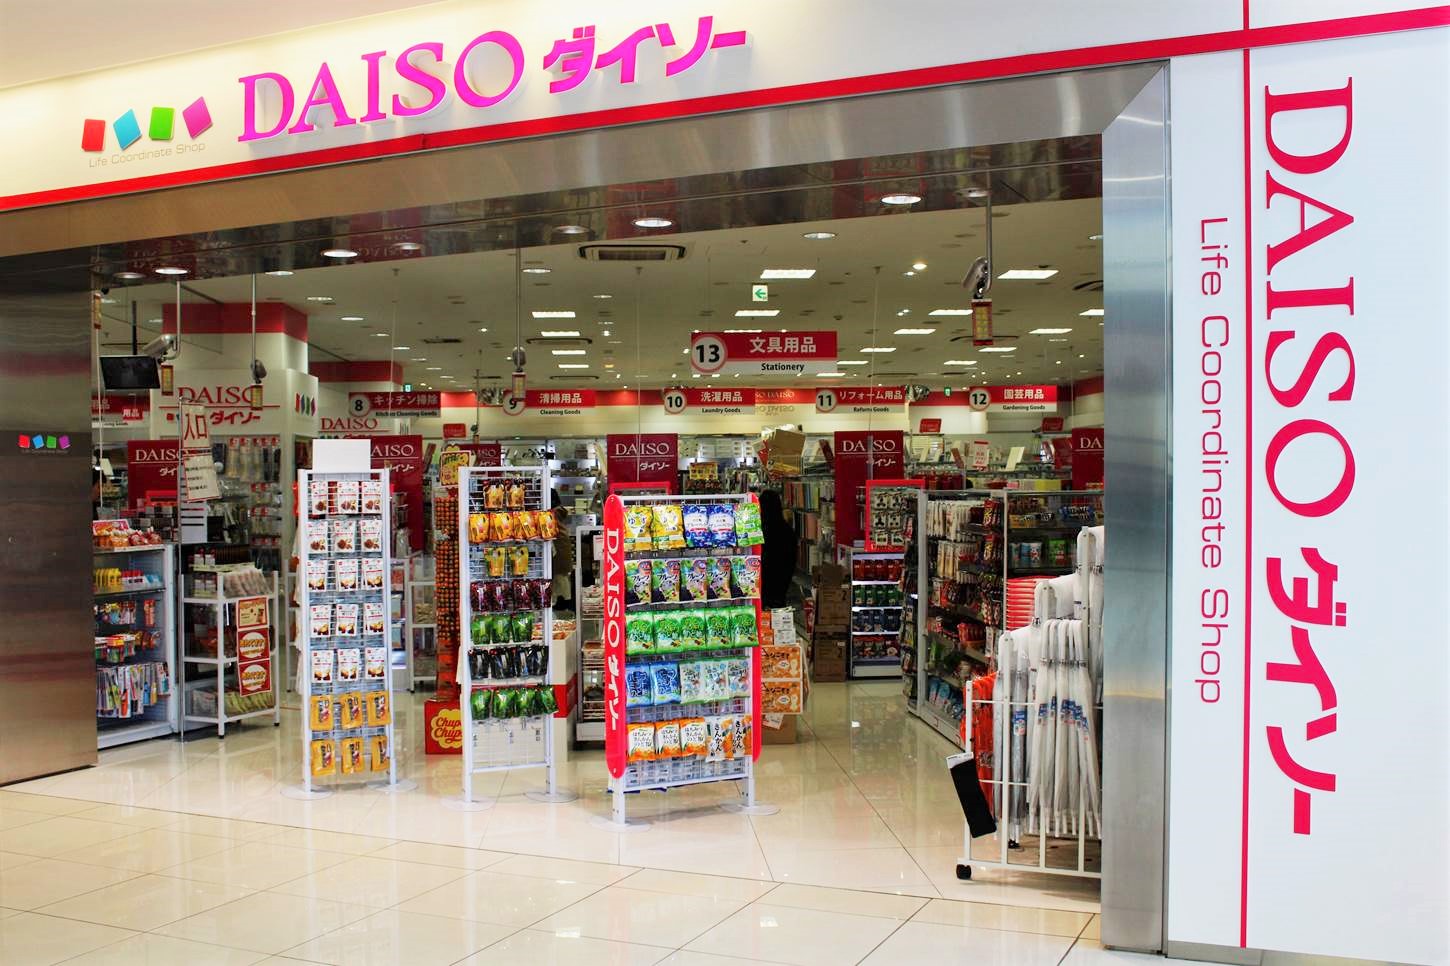  The entrance to a Daiso store located in a modern shopping complex in Chiba City=Shutterstock